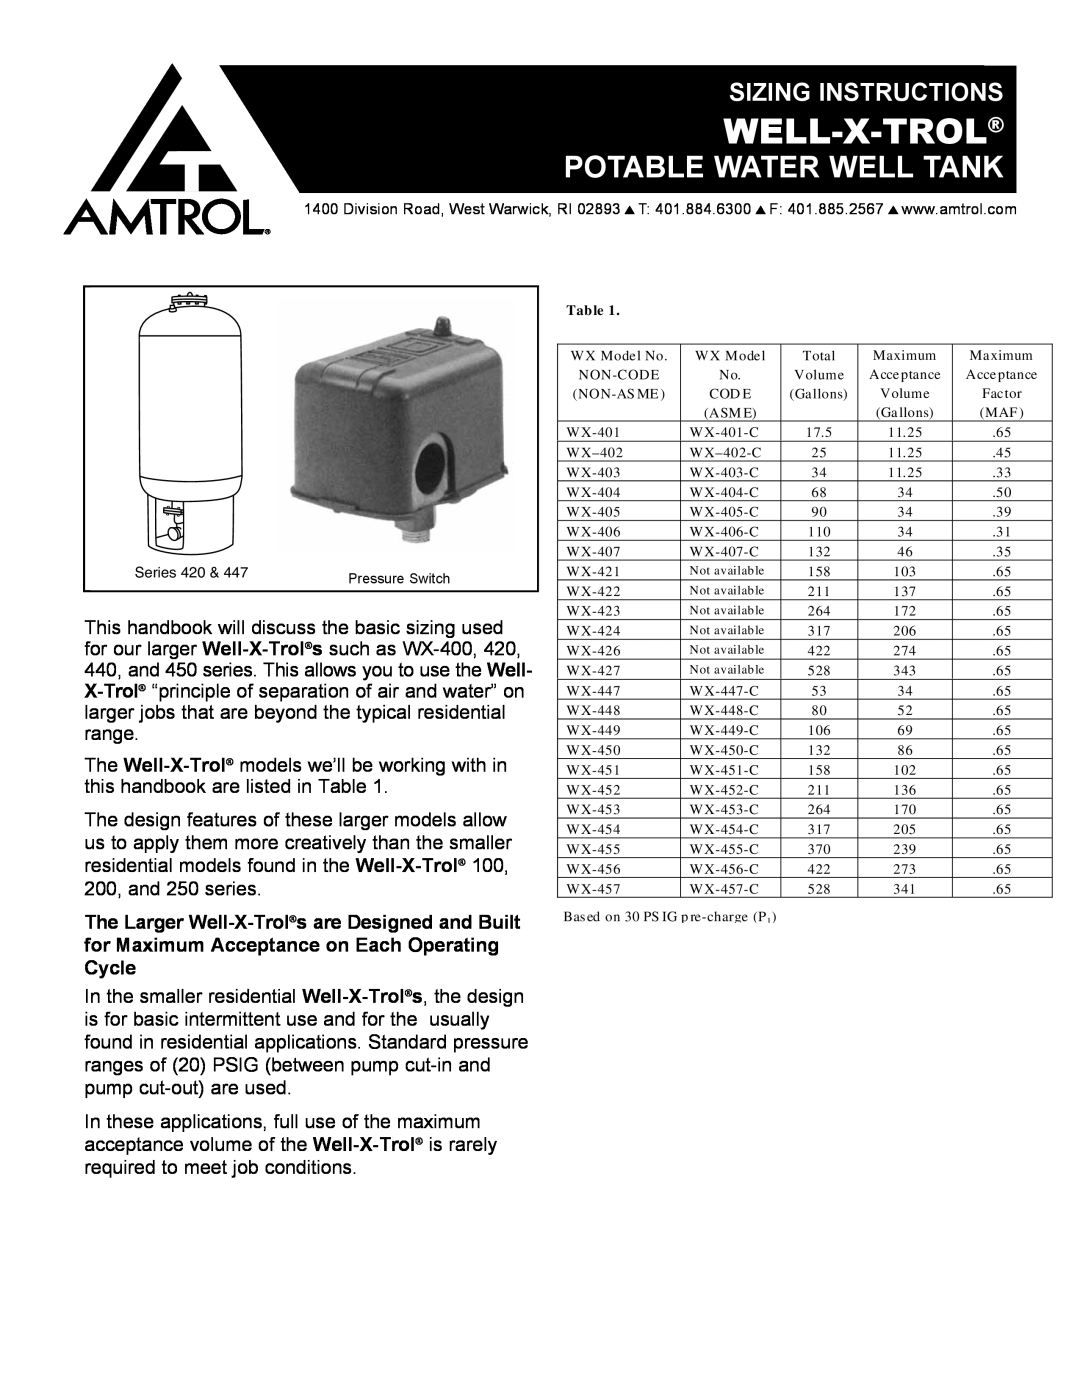 Amtrol WX-401, 420 manual Well-X-Trol, Potable Water Well Tank, Sizing Instructions 